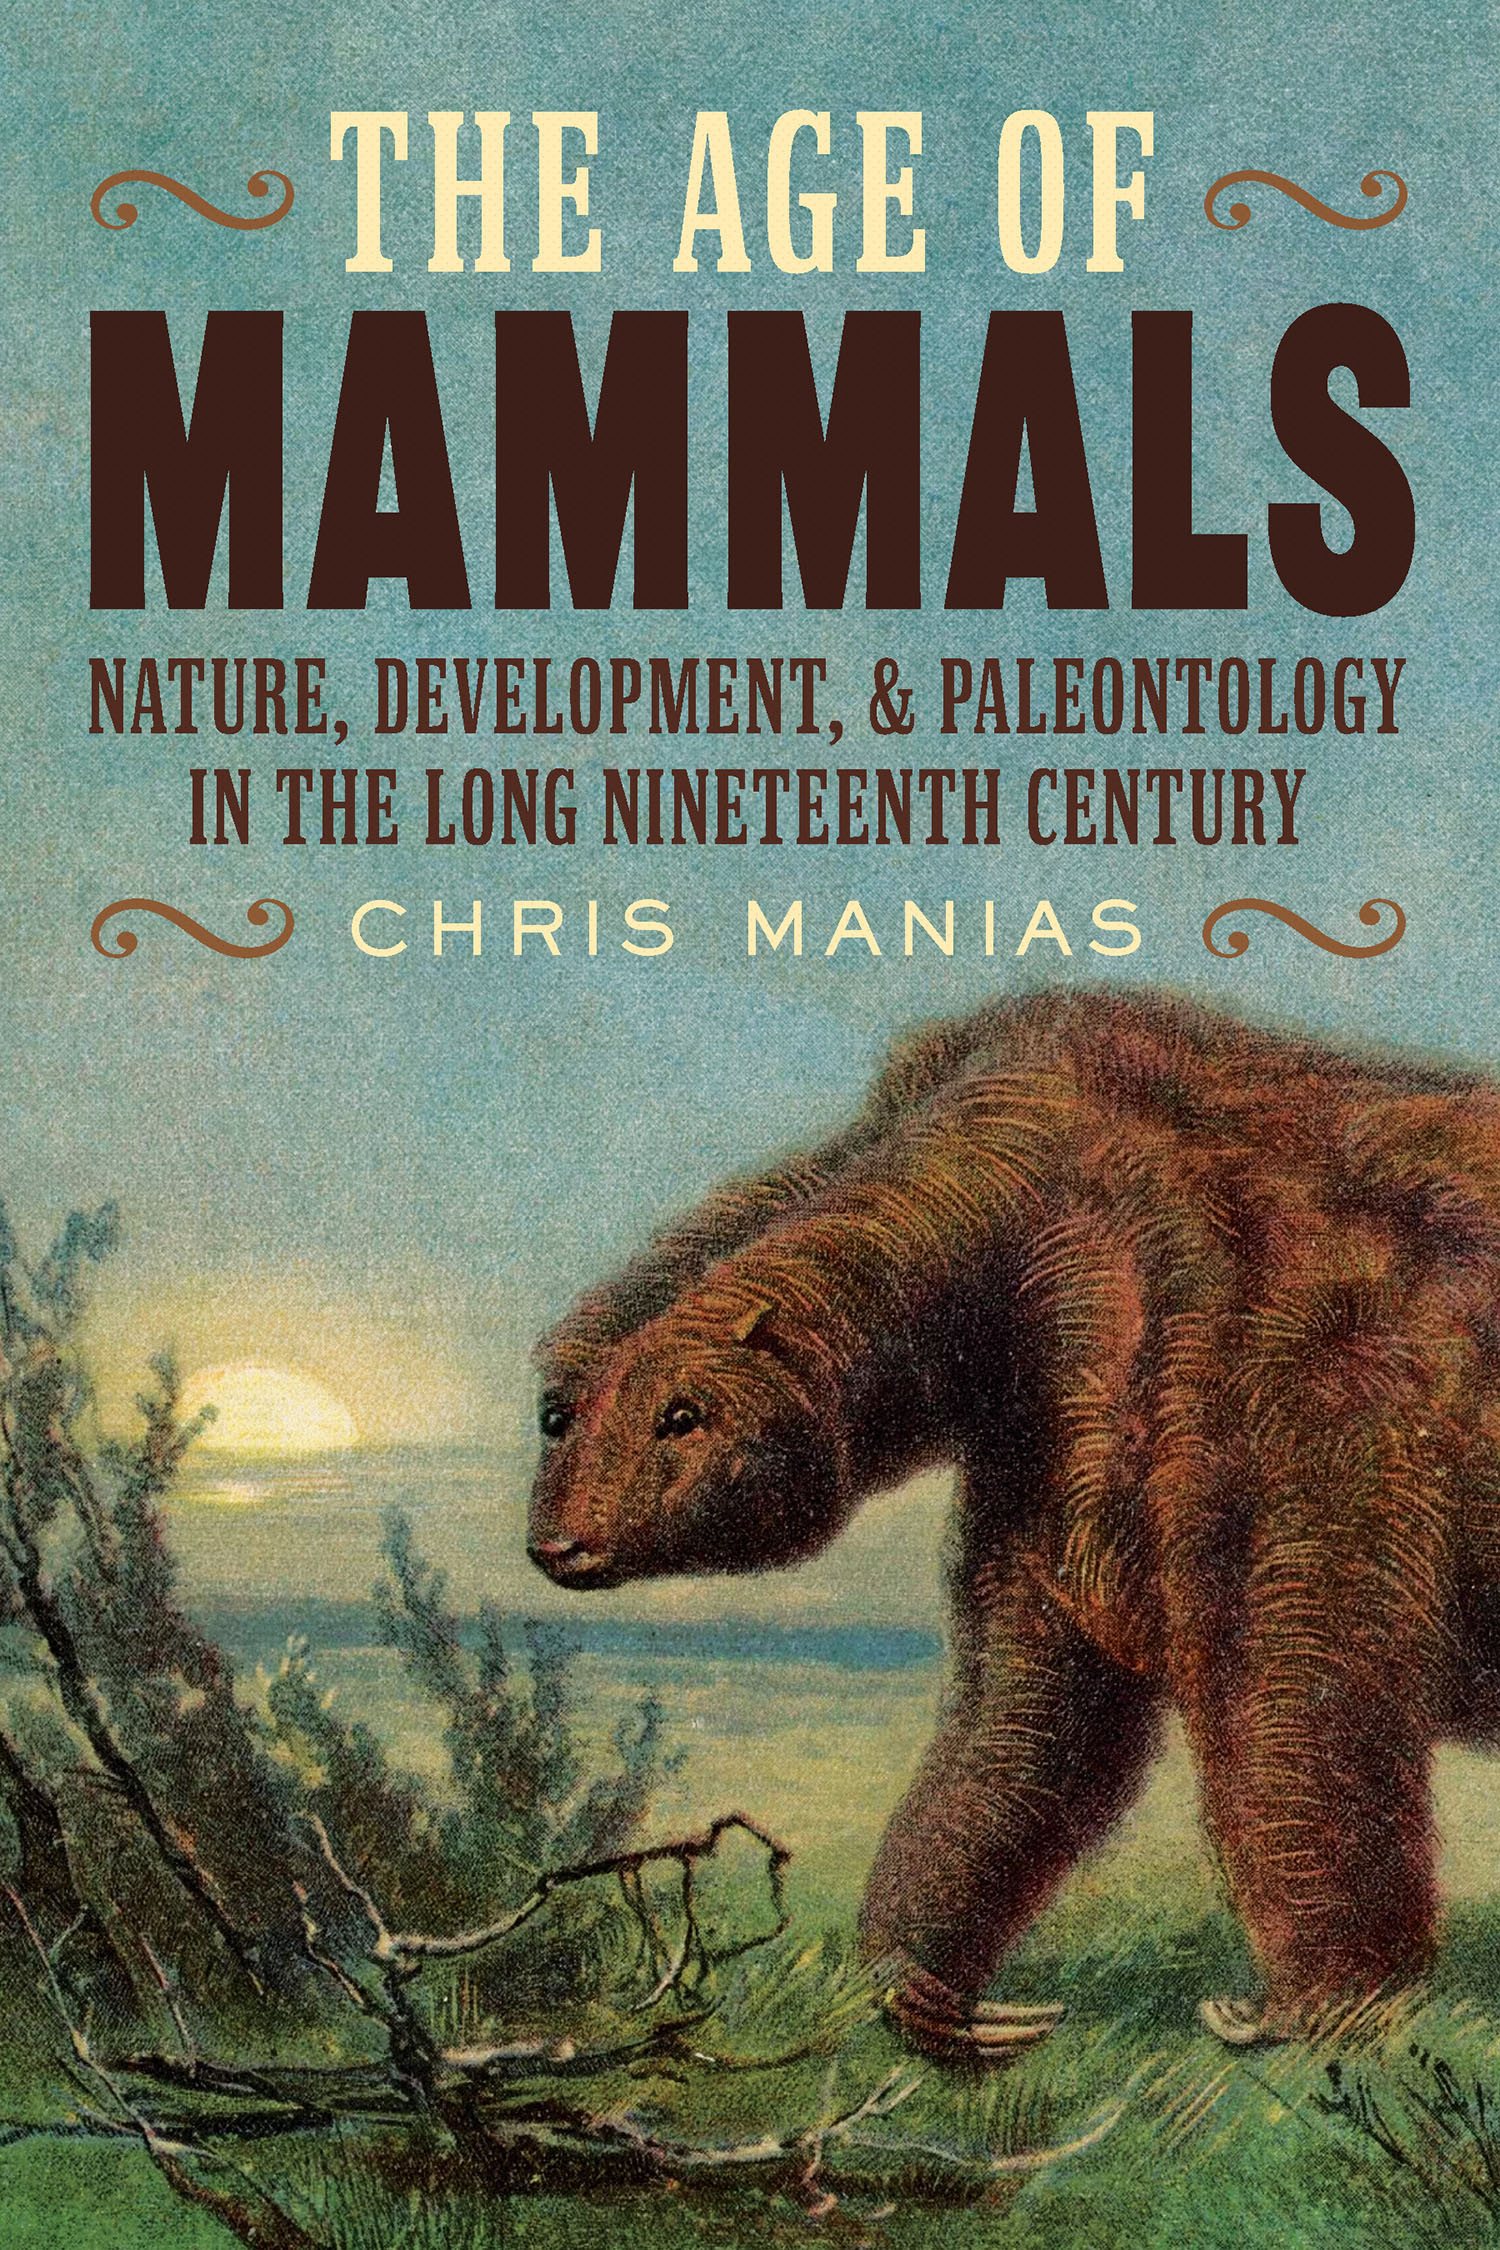 Episode 21: The Age of Mammals with Chris Manias